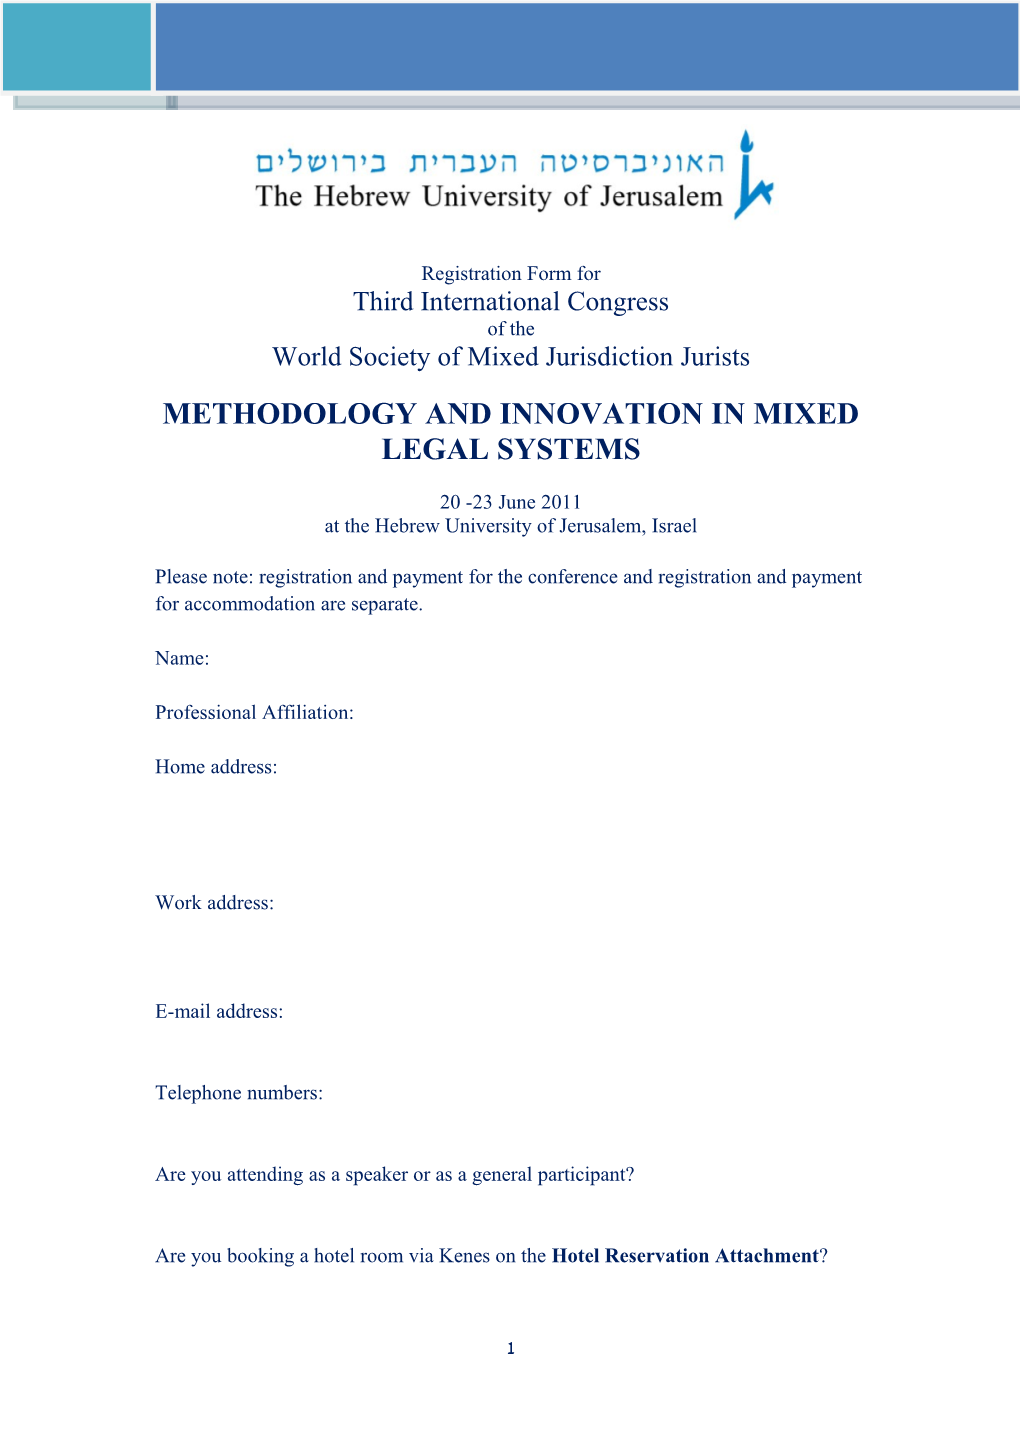 Methodology and Innovation in Mixed Legal Systems